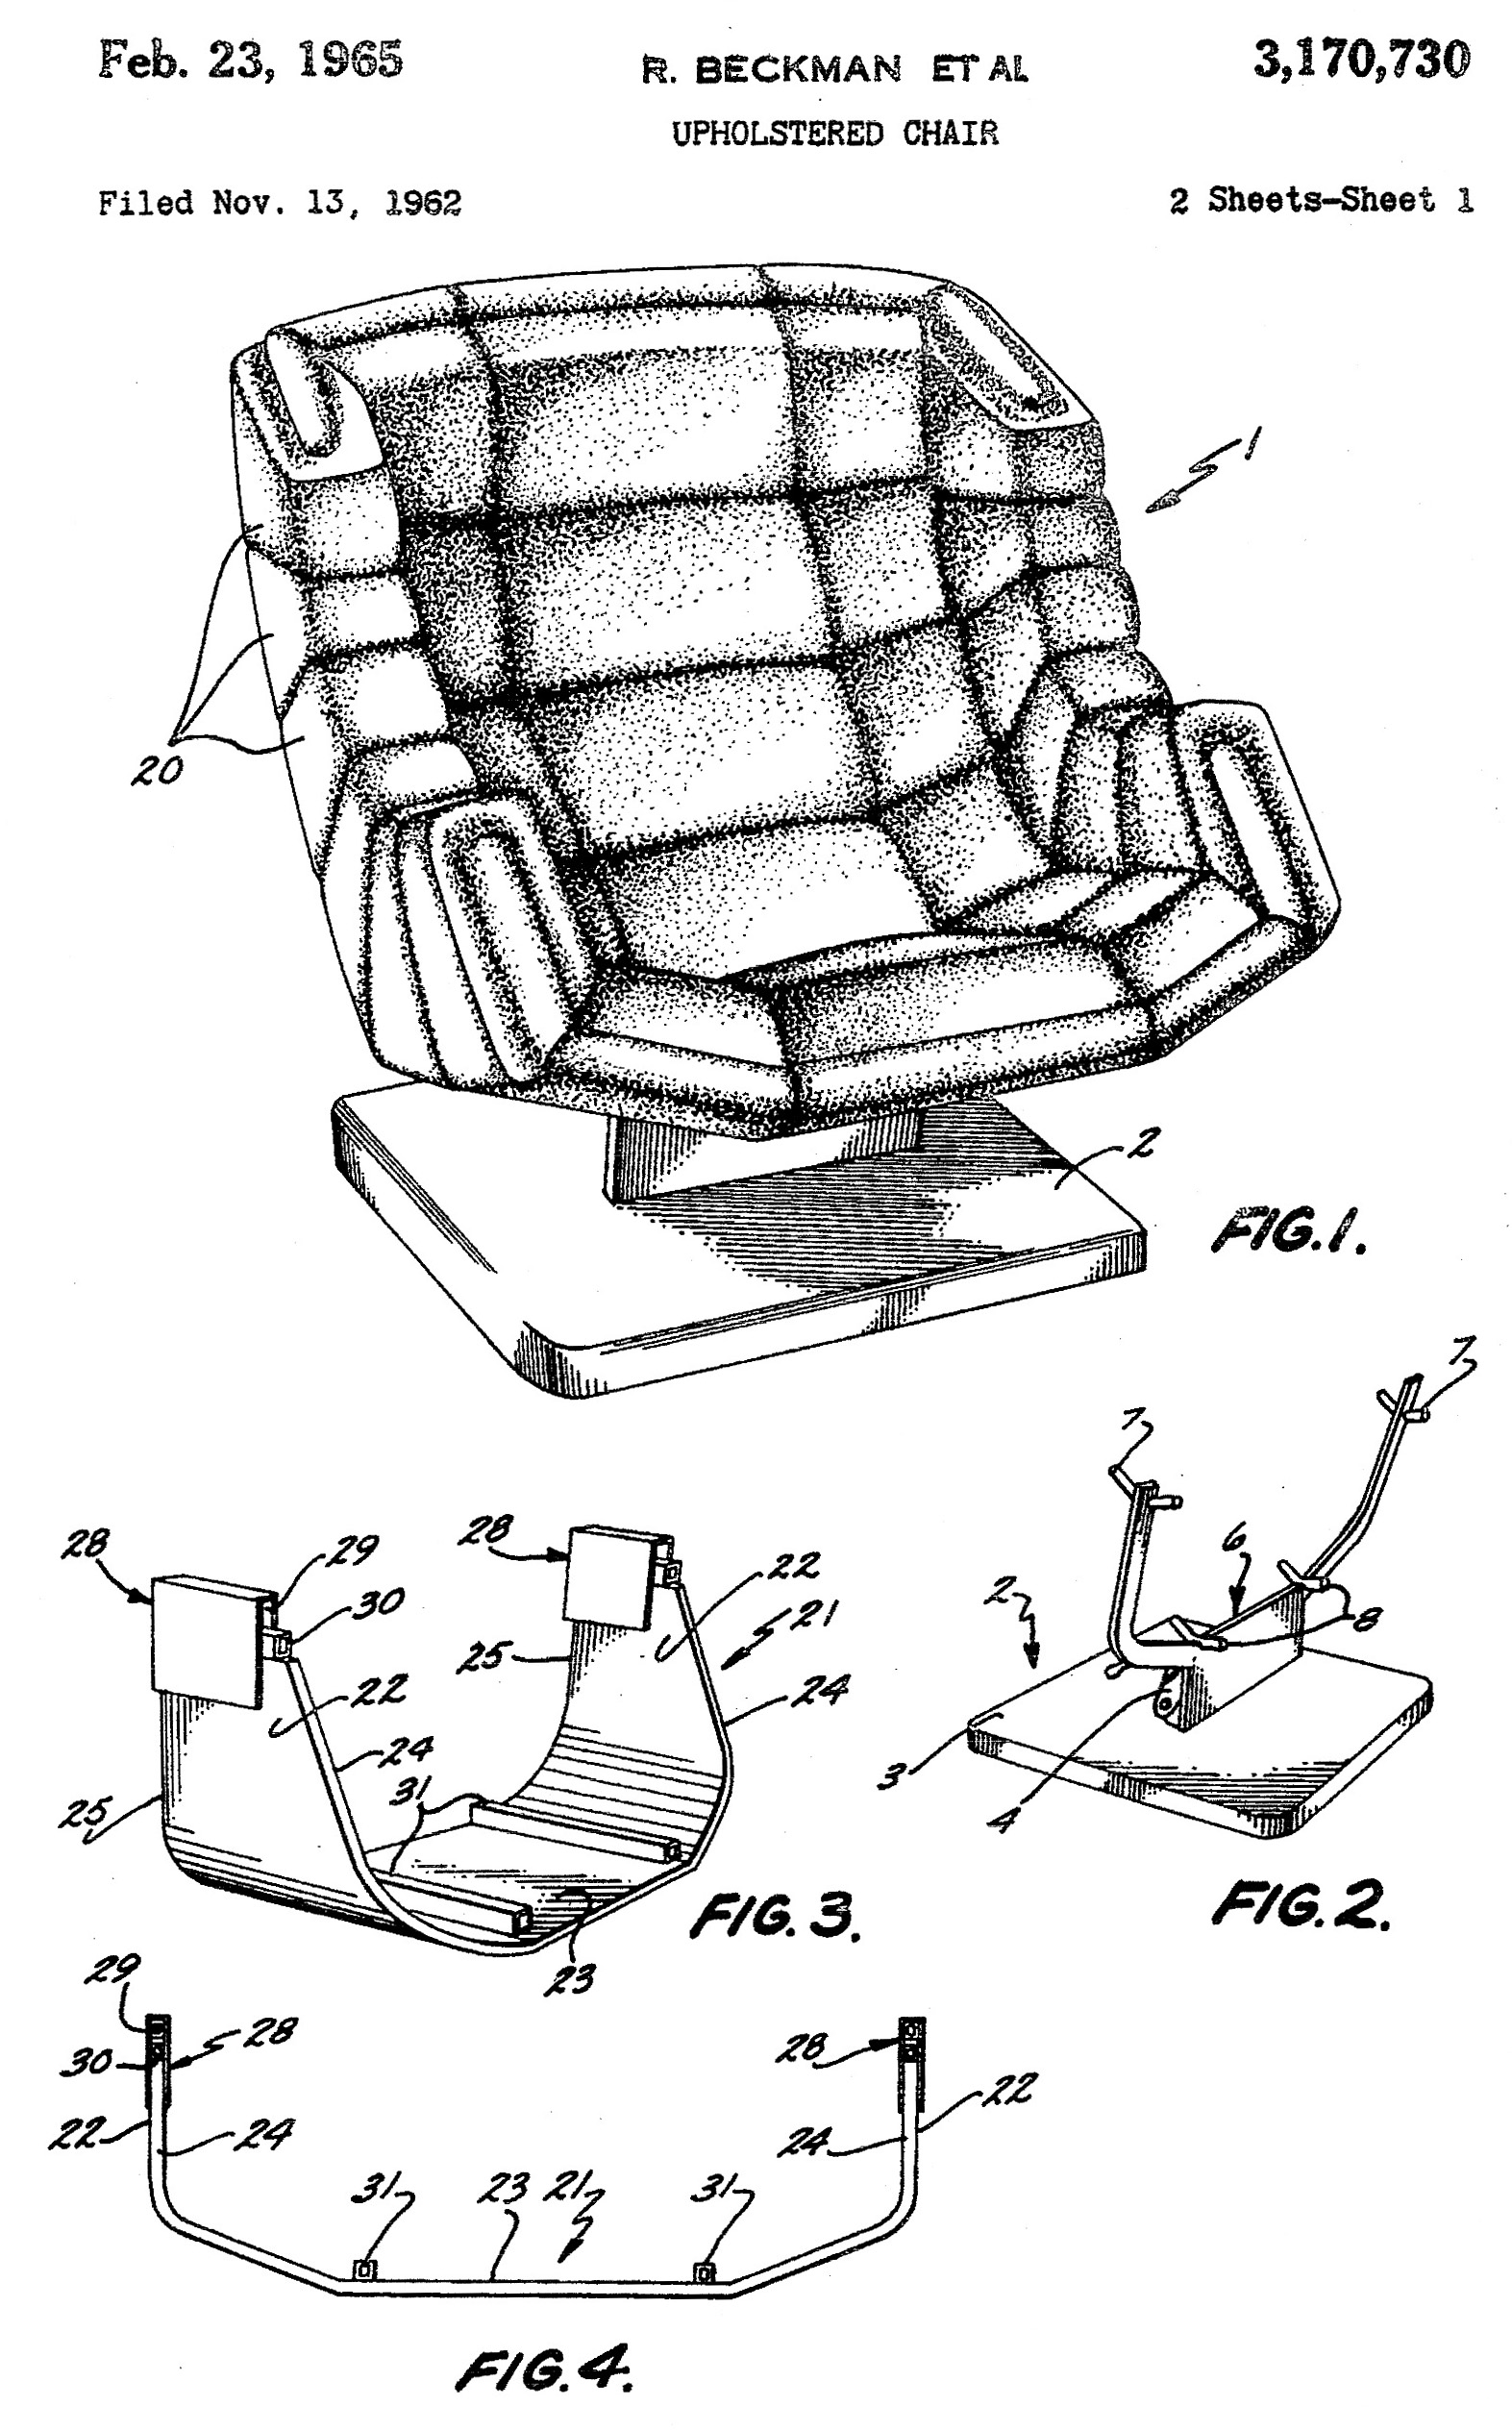 Segmented chair patent office drawing